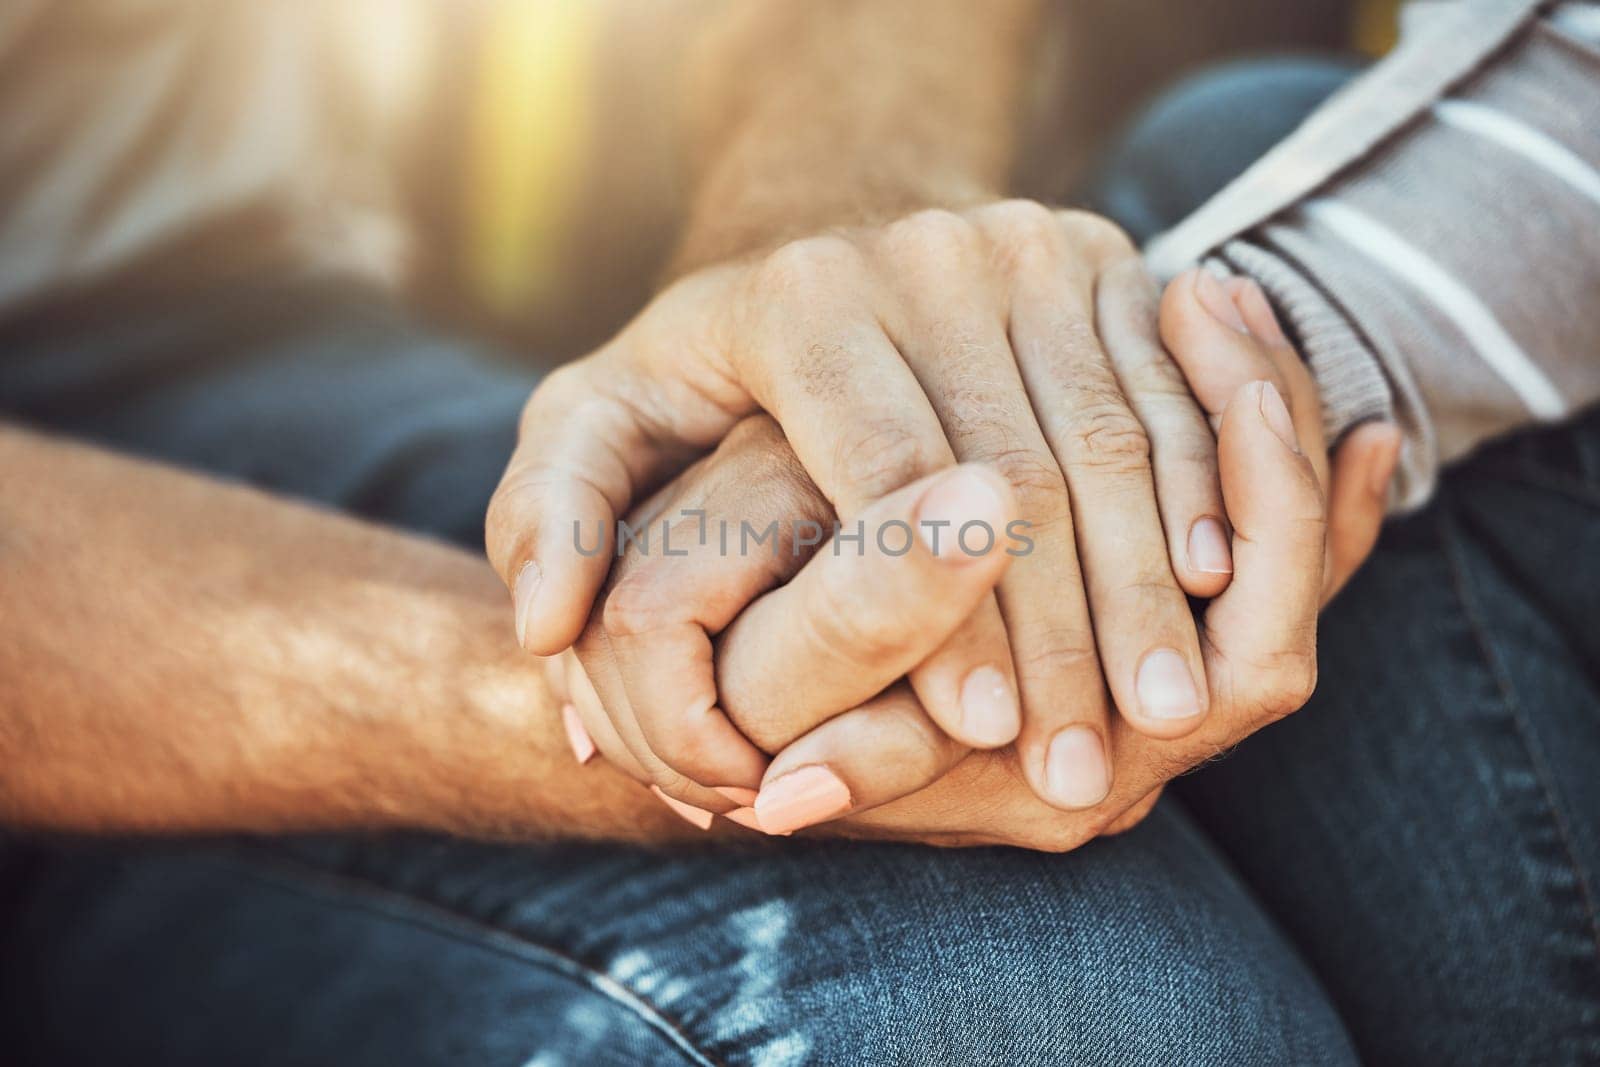 Couple, love and holding hands for support, trust and affection, romance and care. Valentines day, commitment and man and woman together for unity, union and empathy, romantic bonding or relationship.